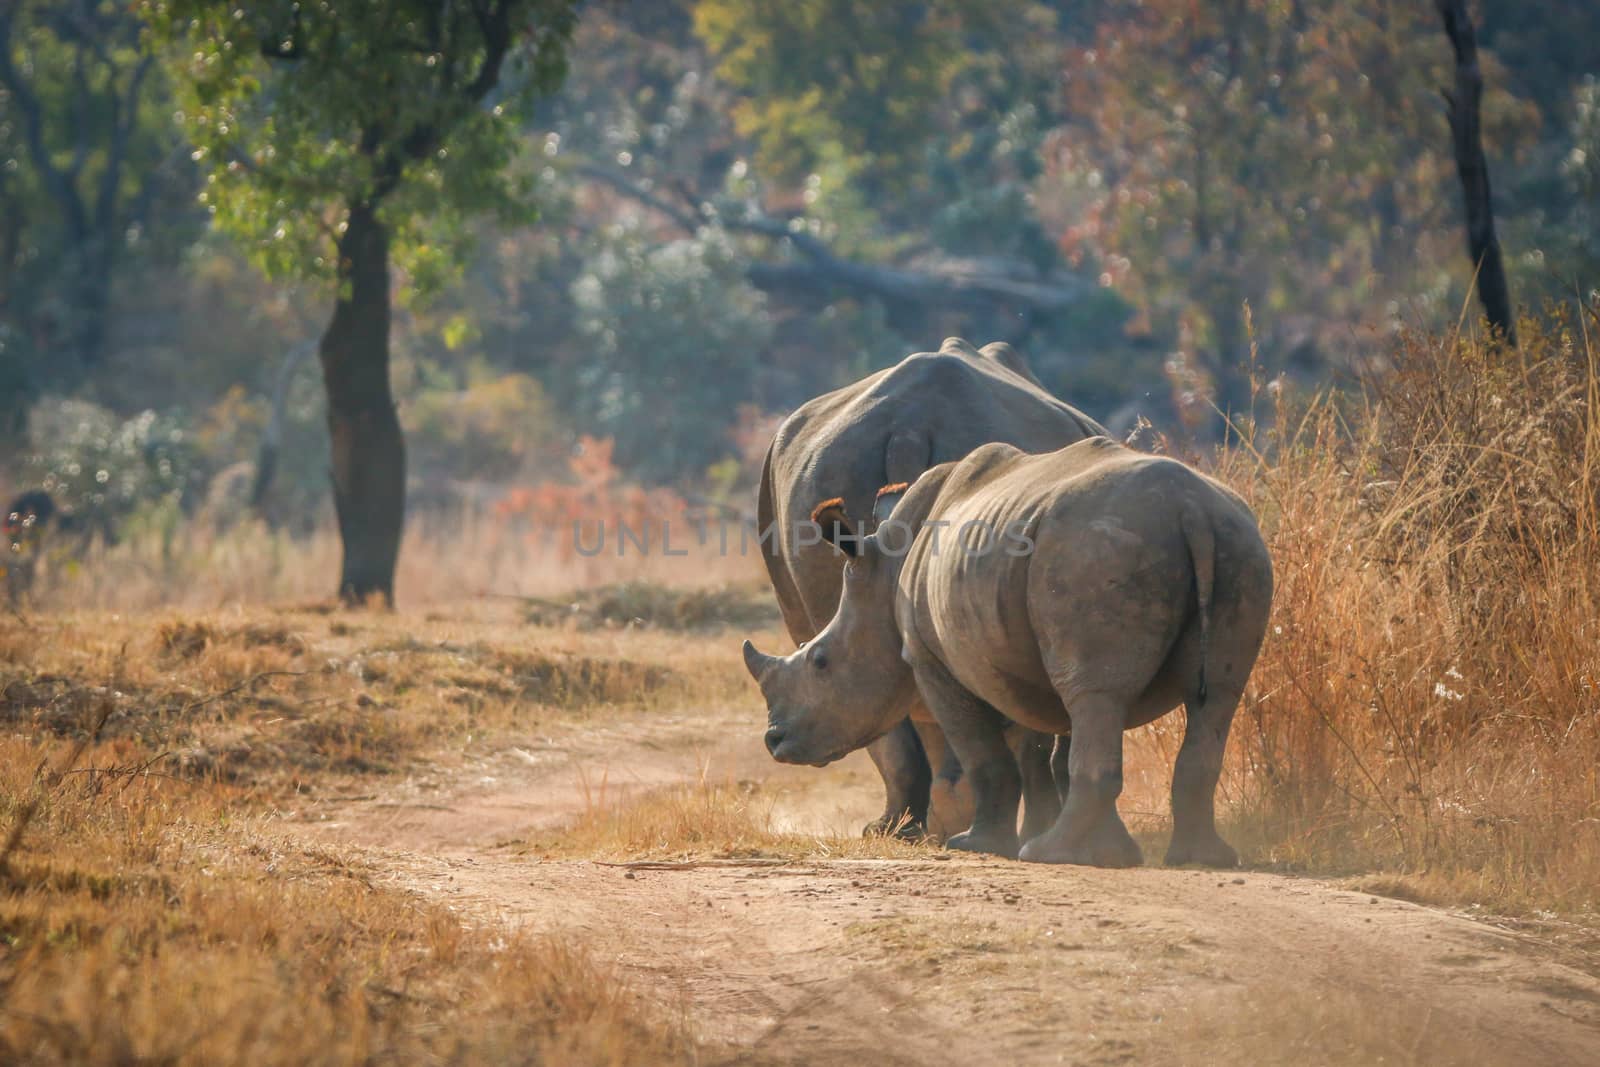 White rhinos walking on the road. by Simoneemanphotography